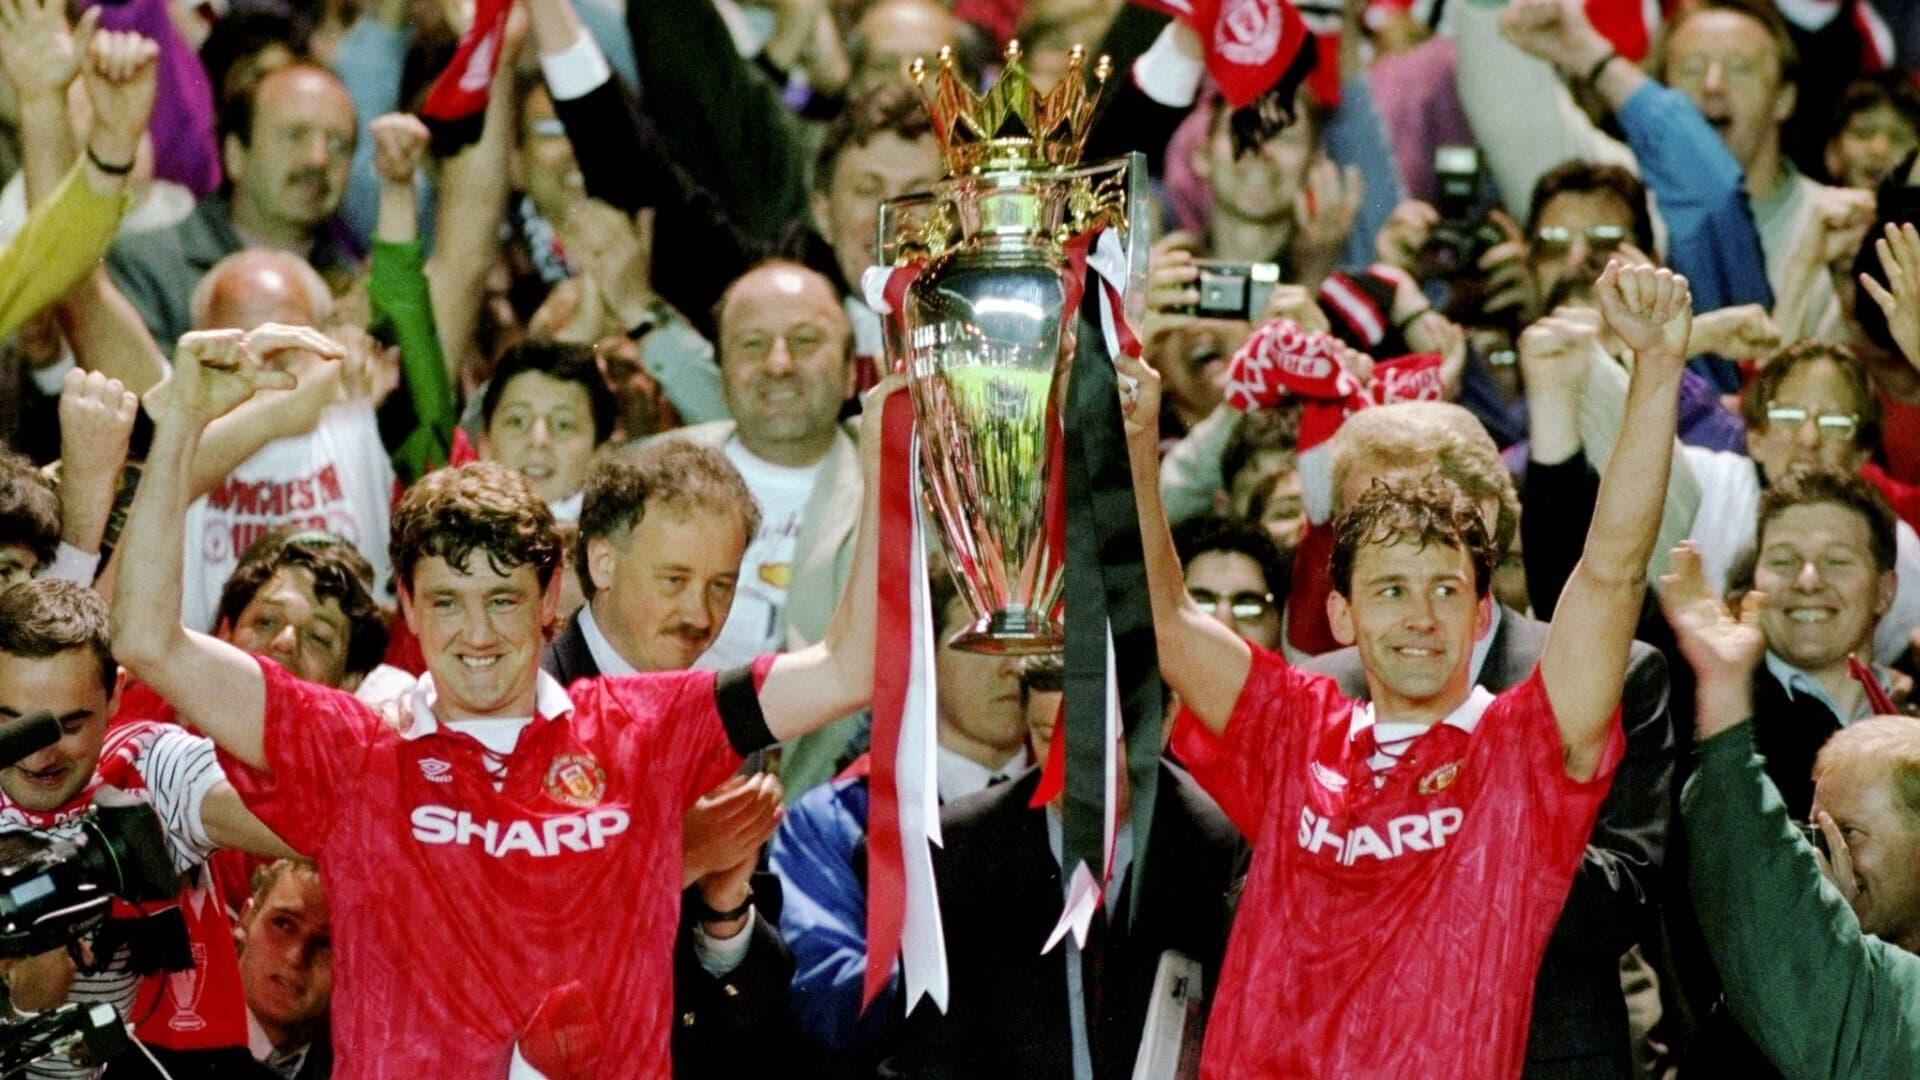 Robbo: The Bryan Robson Story backdrop